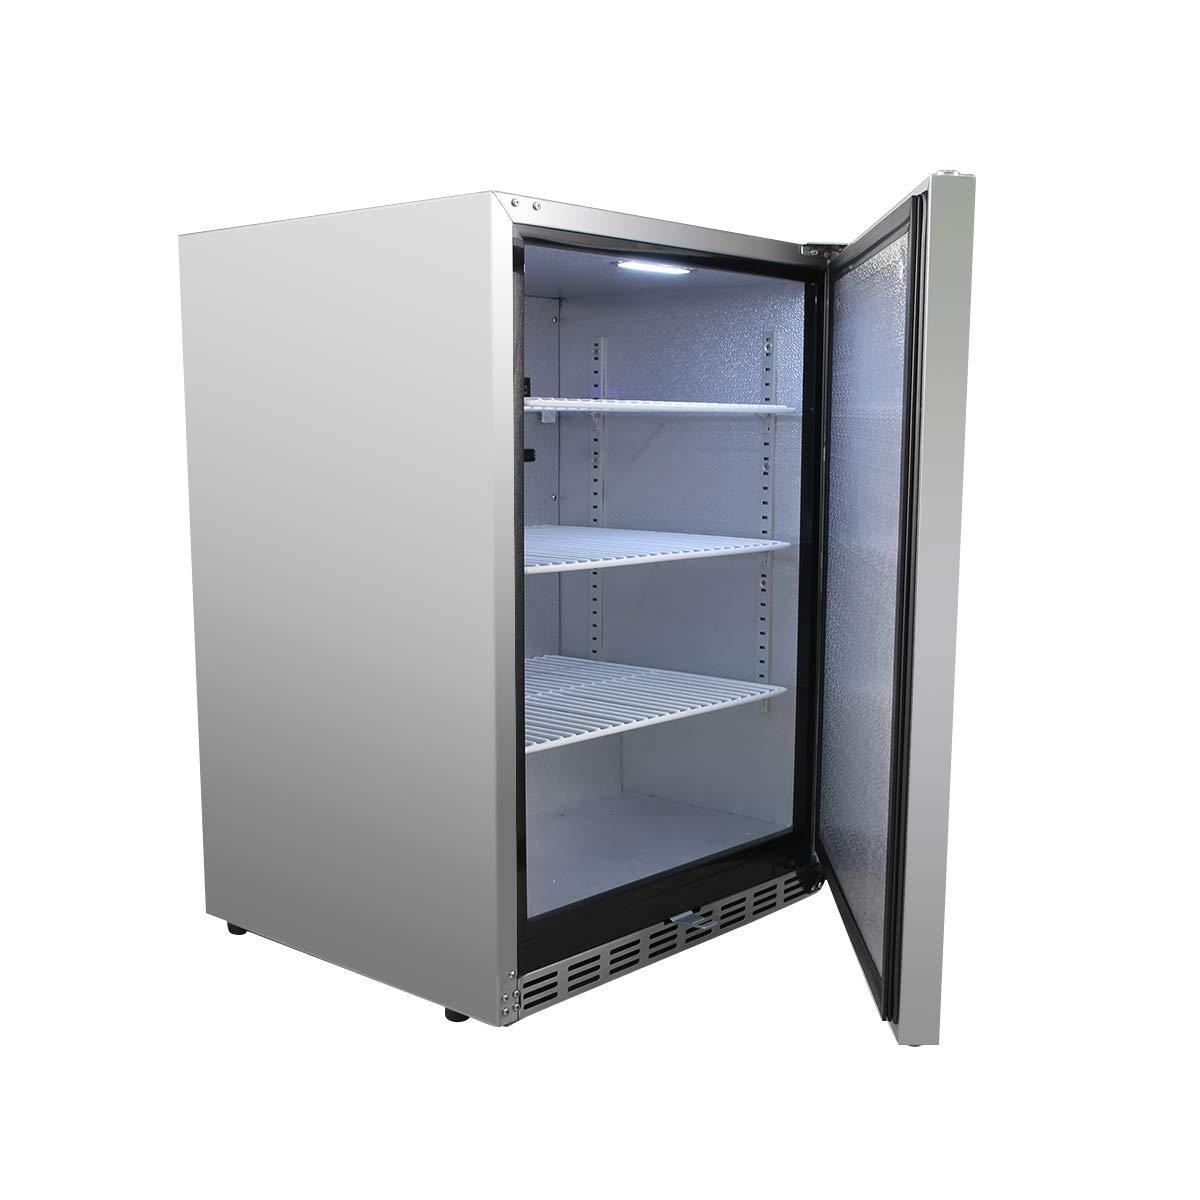 HCK 24 inch Undercounter Refrigerators, Weatherproof Outdoor Fridge with Stainless Steel Body for Patio, Beverage Refrigerator with Reversible Door, Lockable Design for Home and Commercial 5.12 Cu.Ft - CookCave